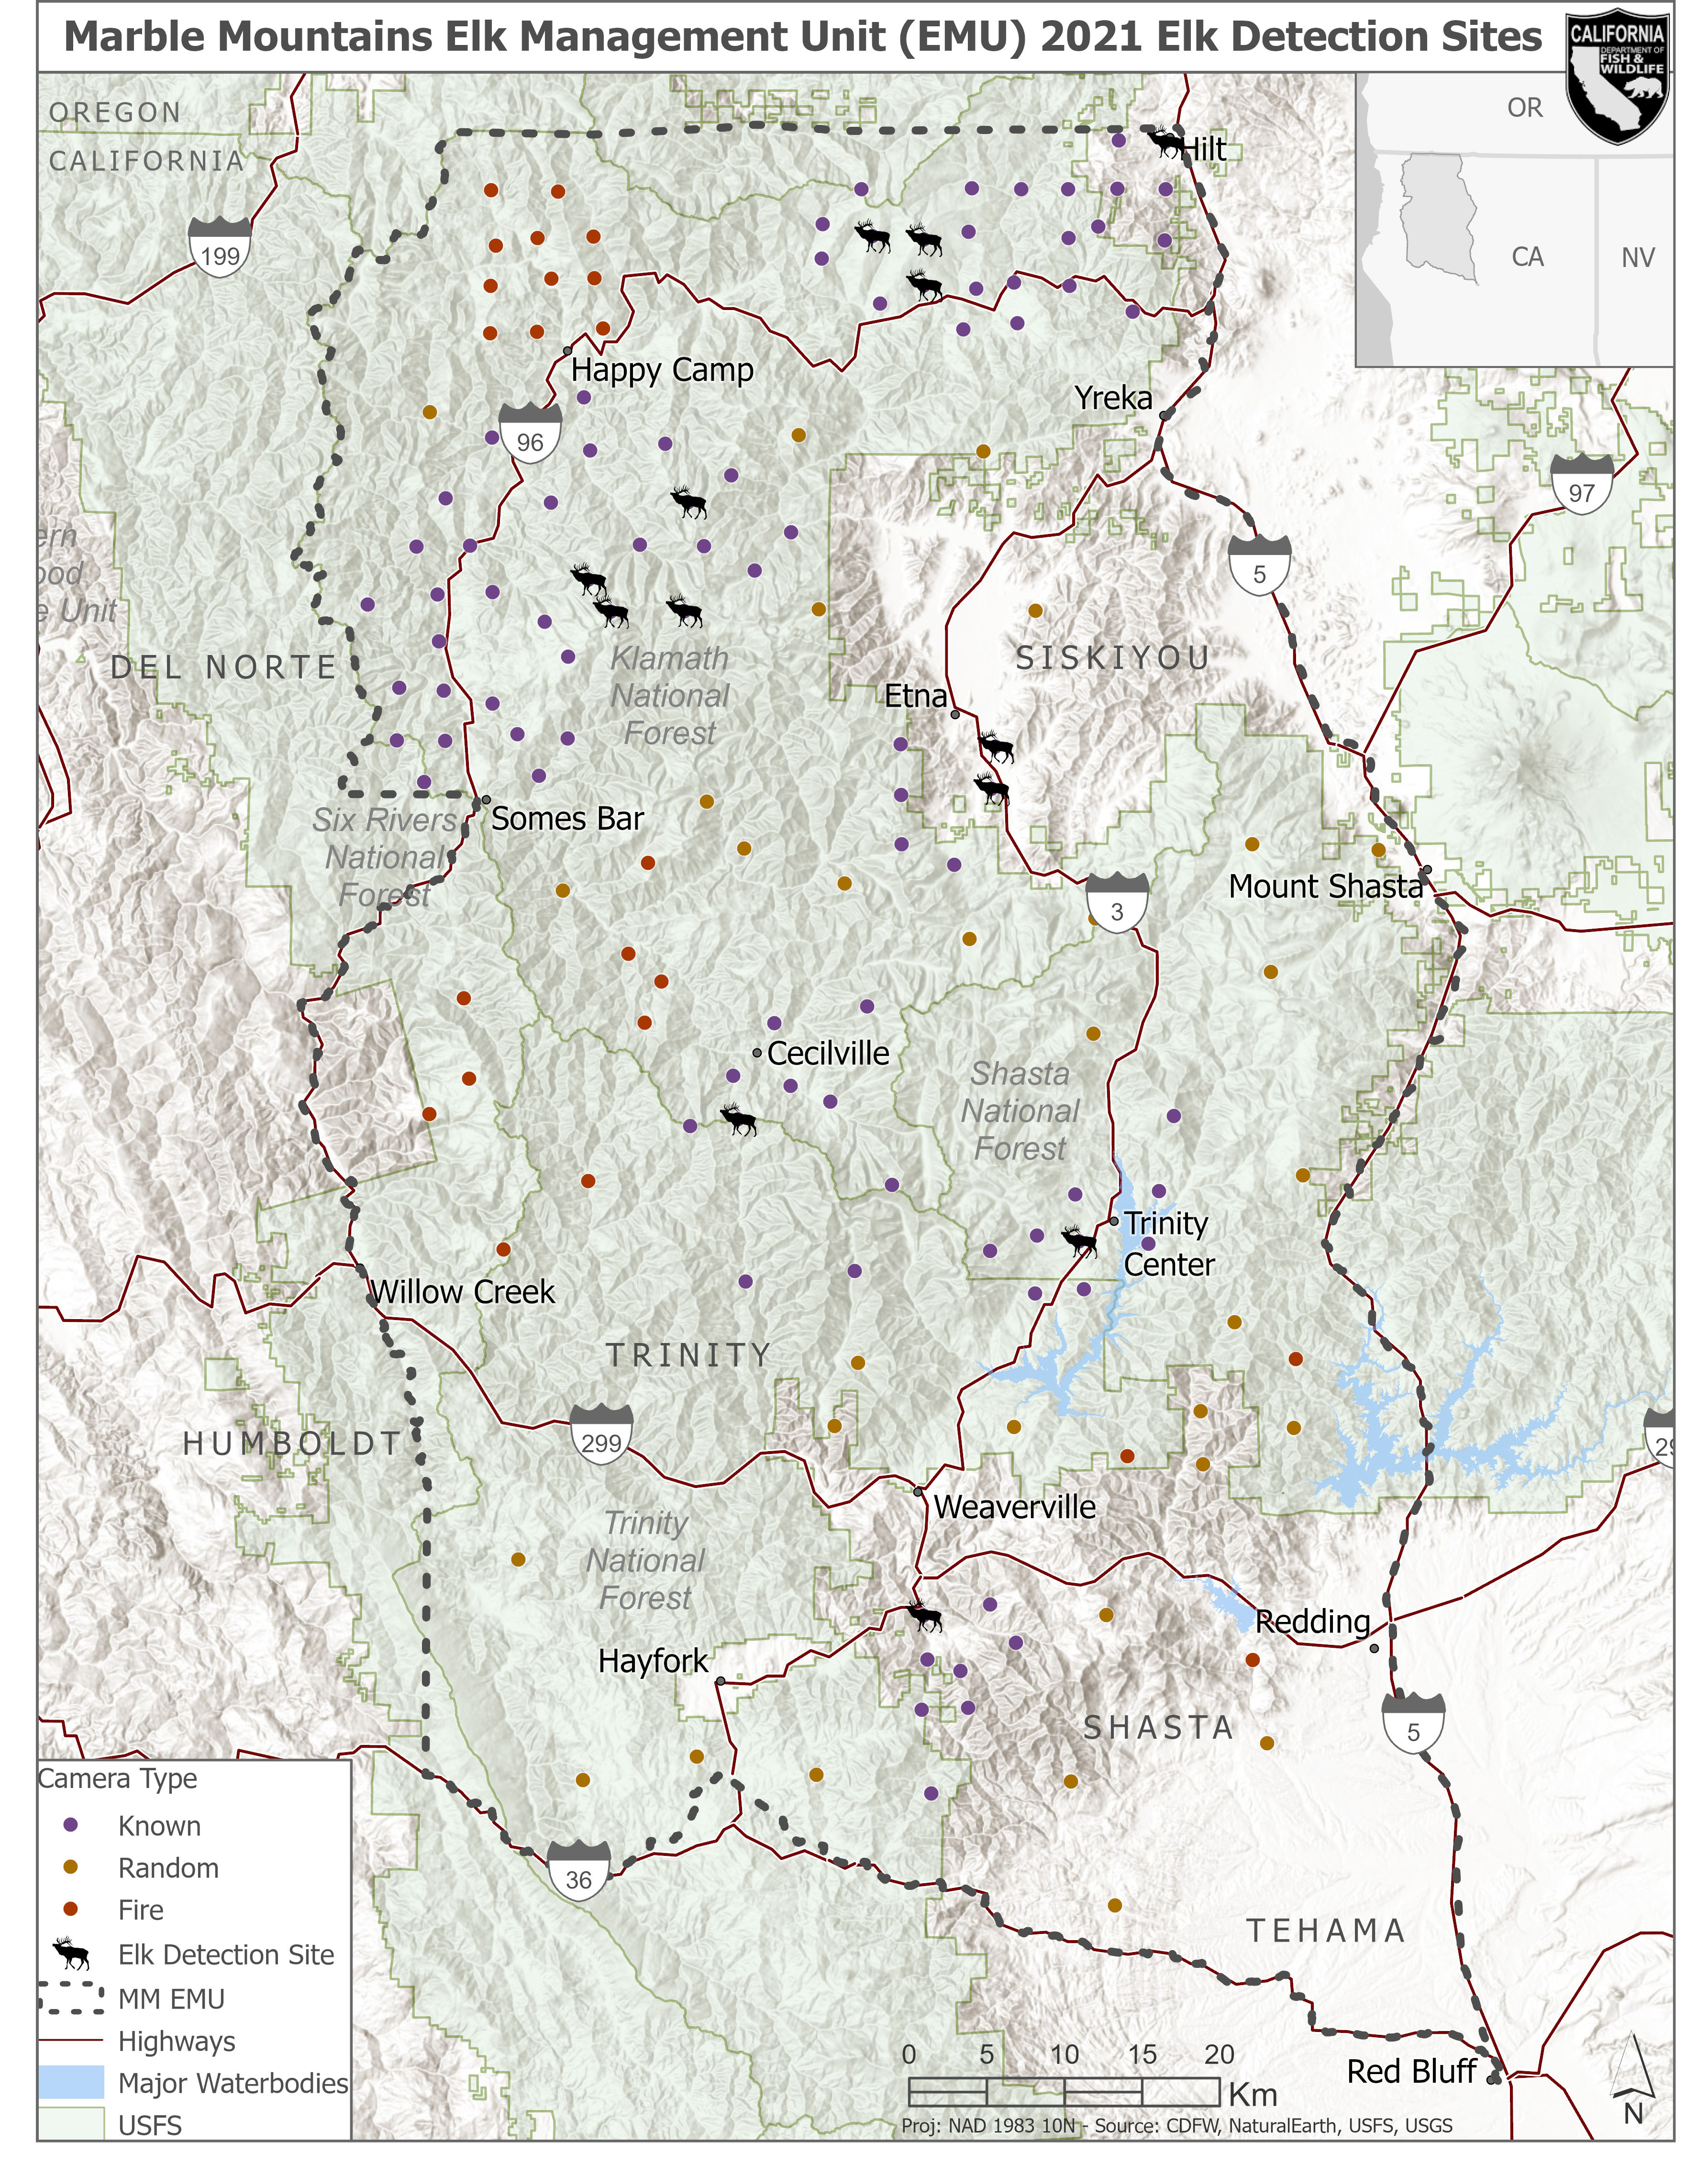 Camera site locations (n = 143) used to estimate the abundance of elk (Cervus canadensis spp.) within the Marble Mountains Elk Management Unit (EMU) in northern California, USA. Data from 7 June to 15 August 2021 were used, and sites with positive elk detections (n = 13) are shown (black elk icons).